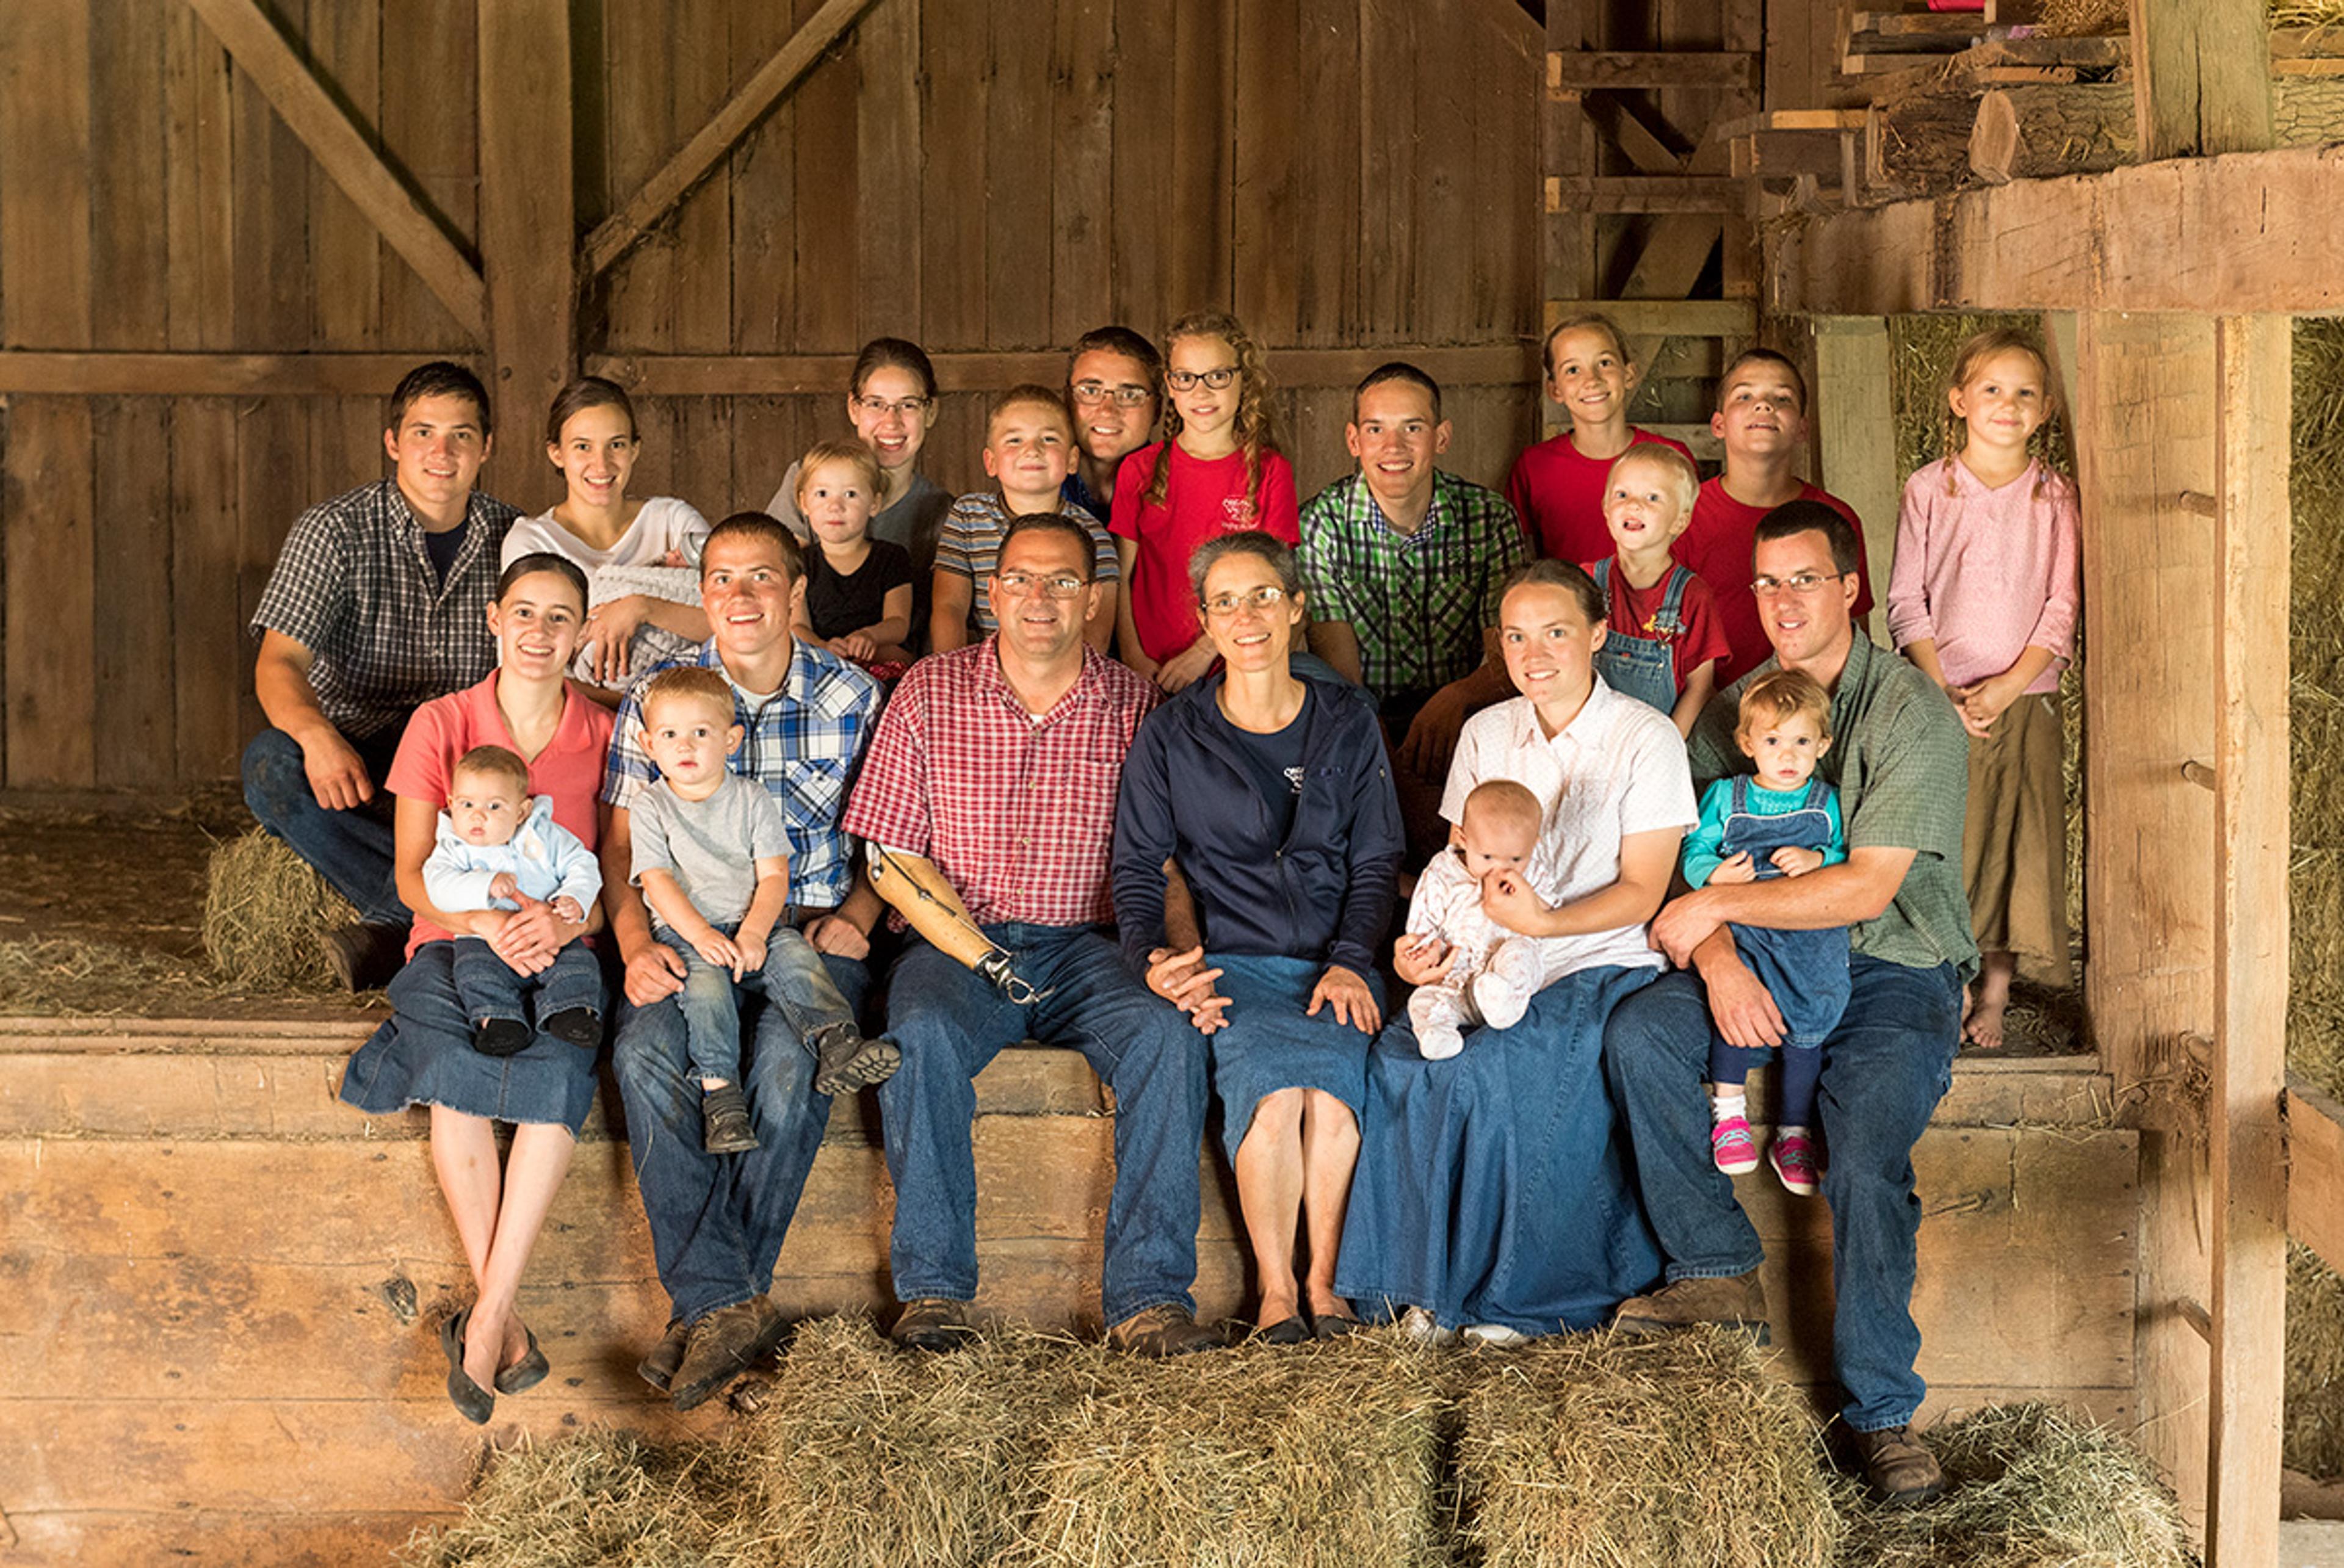 The 23-person Stoller family poses for a portrait in their barn surrounded by hay bales.